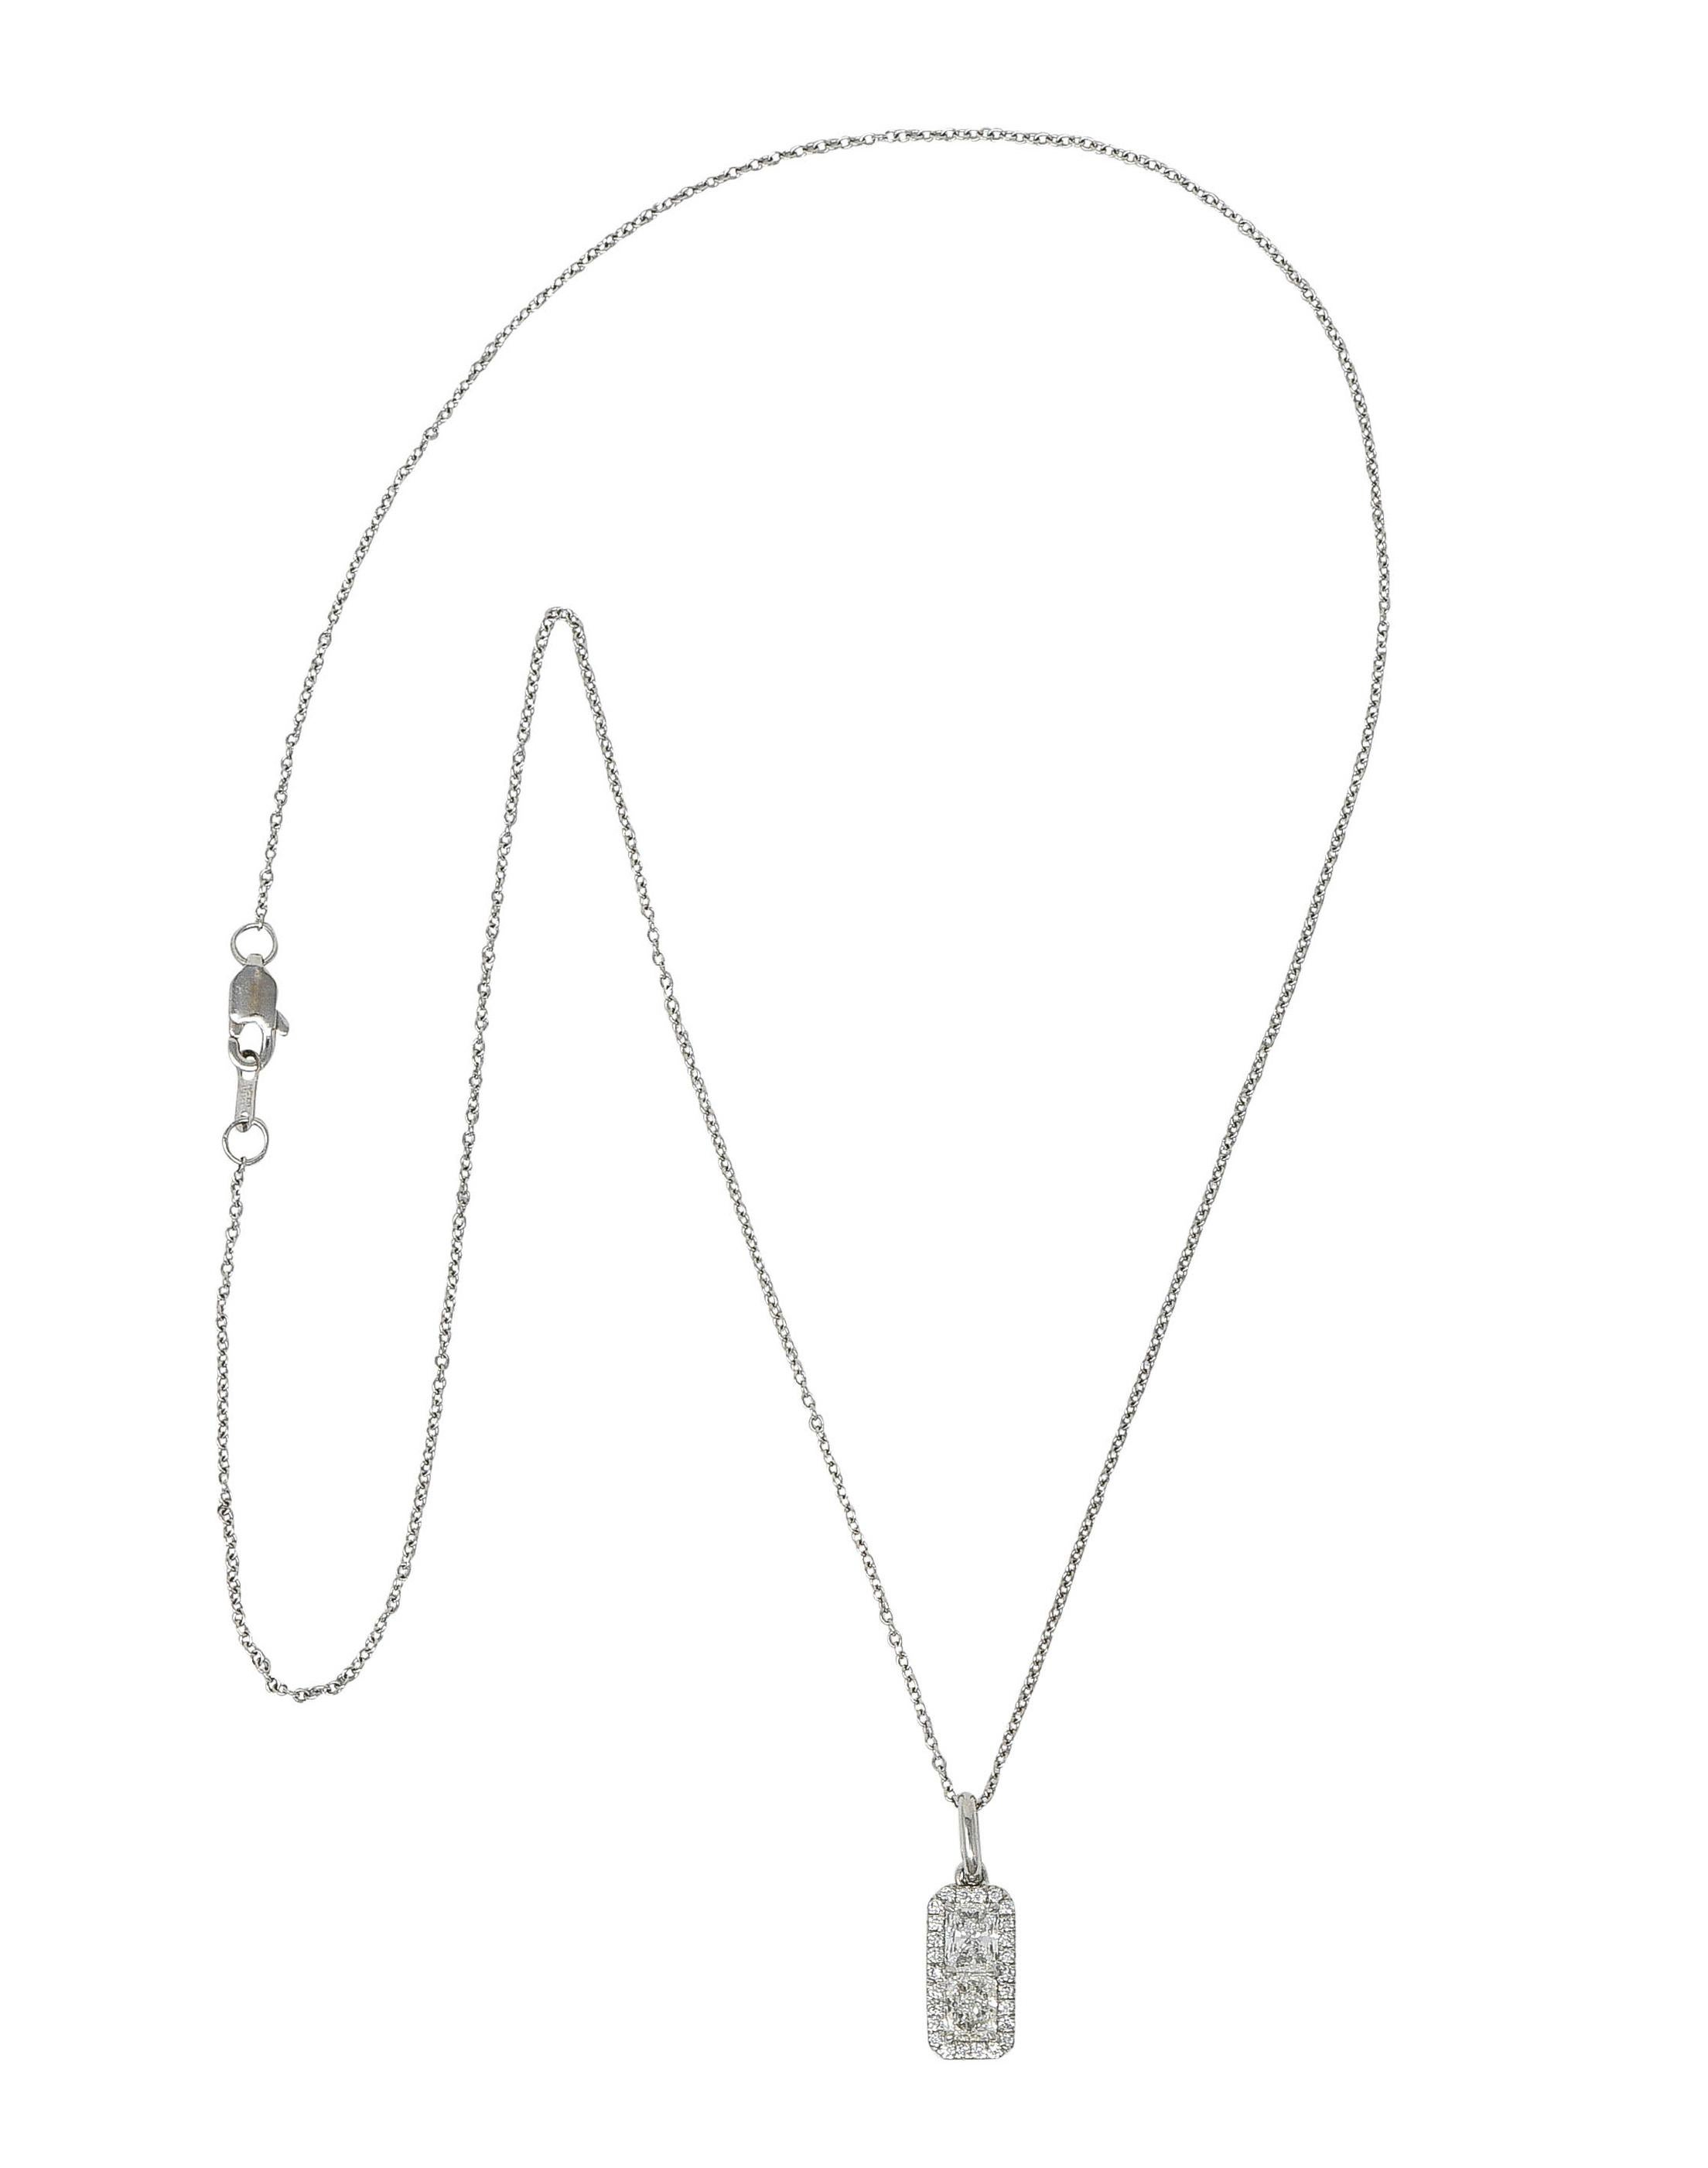 White gold classic cable chain necklace suspending a rectangular platinum pendant

Centering two radiant cut diamonds weighing in total approximately 0.70 carat - G color with VS clarity

Surrounded by a round brilliant cut diamond halo weighing in